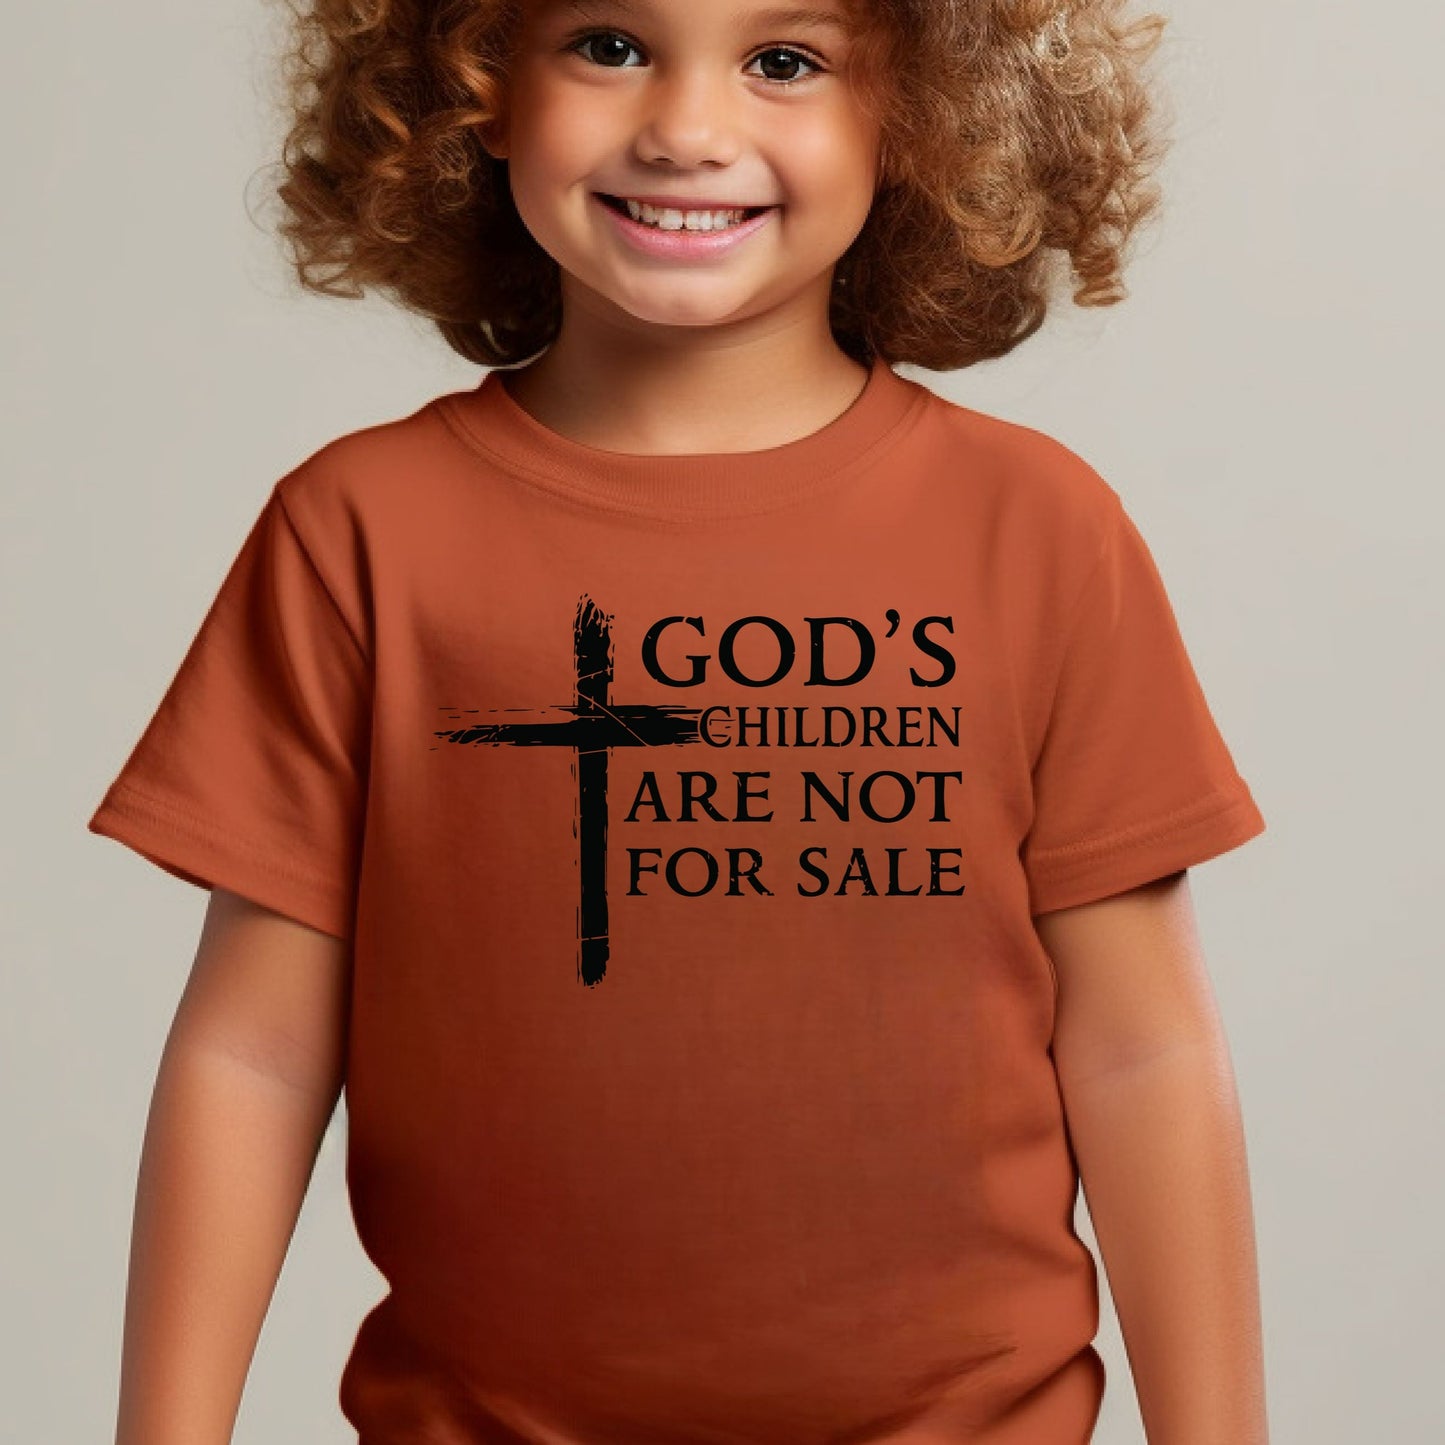 God's Children Are Not For Sale (Toddler with matching pocket)- Single Color (black)- 6" wide Plastisol Screen Print Transfer